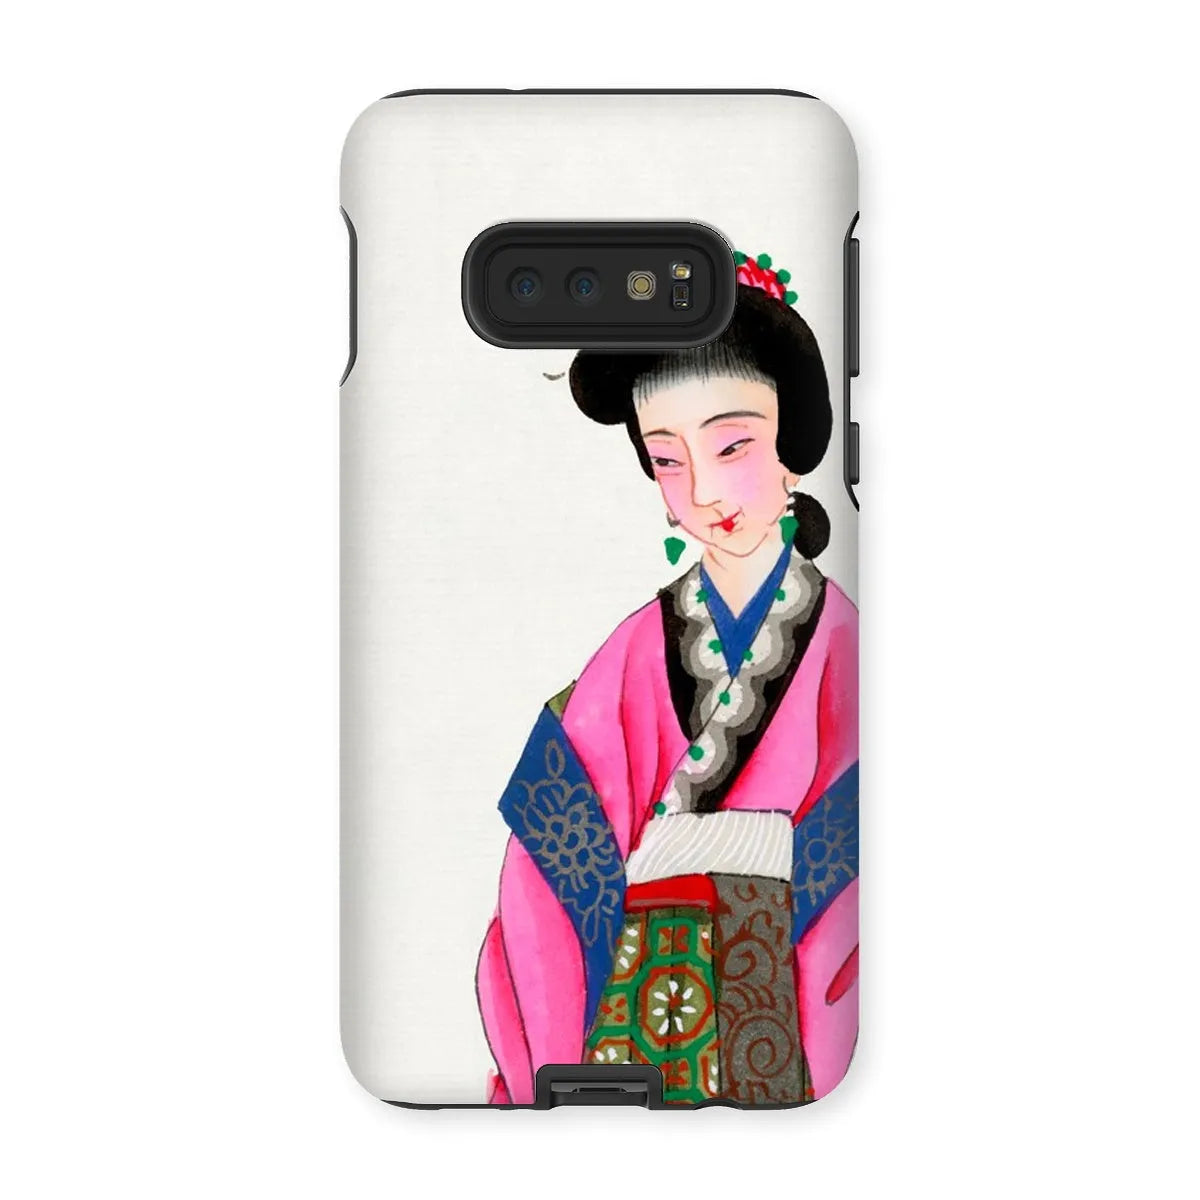 Noblewoman - Chinese Aesthetic Manchu Art Phone Case - Samsung Galaxy S10e / Matte - Mobile Phone Cases - Aesthetic Art